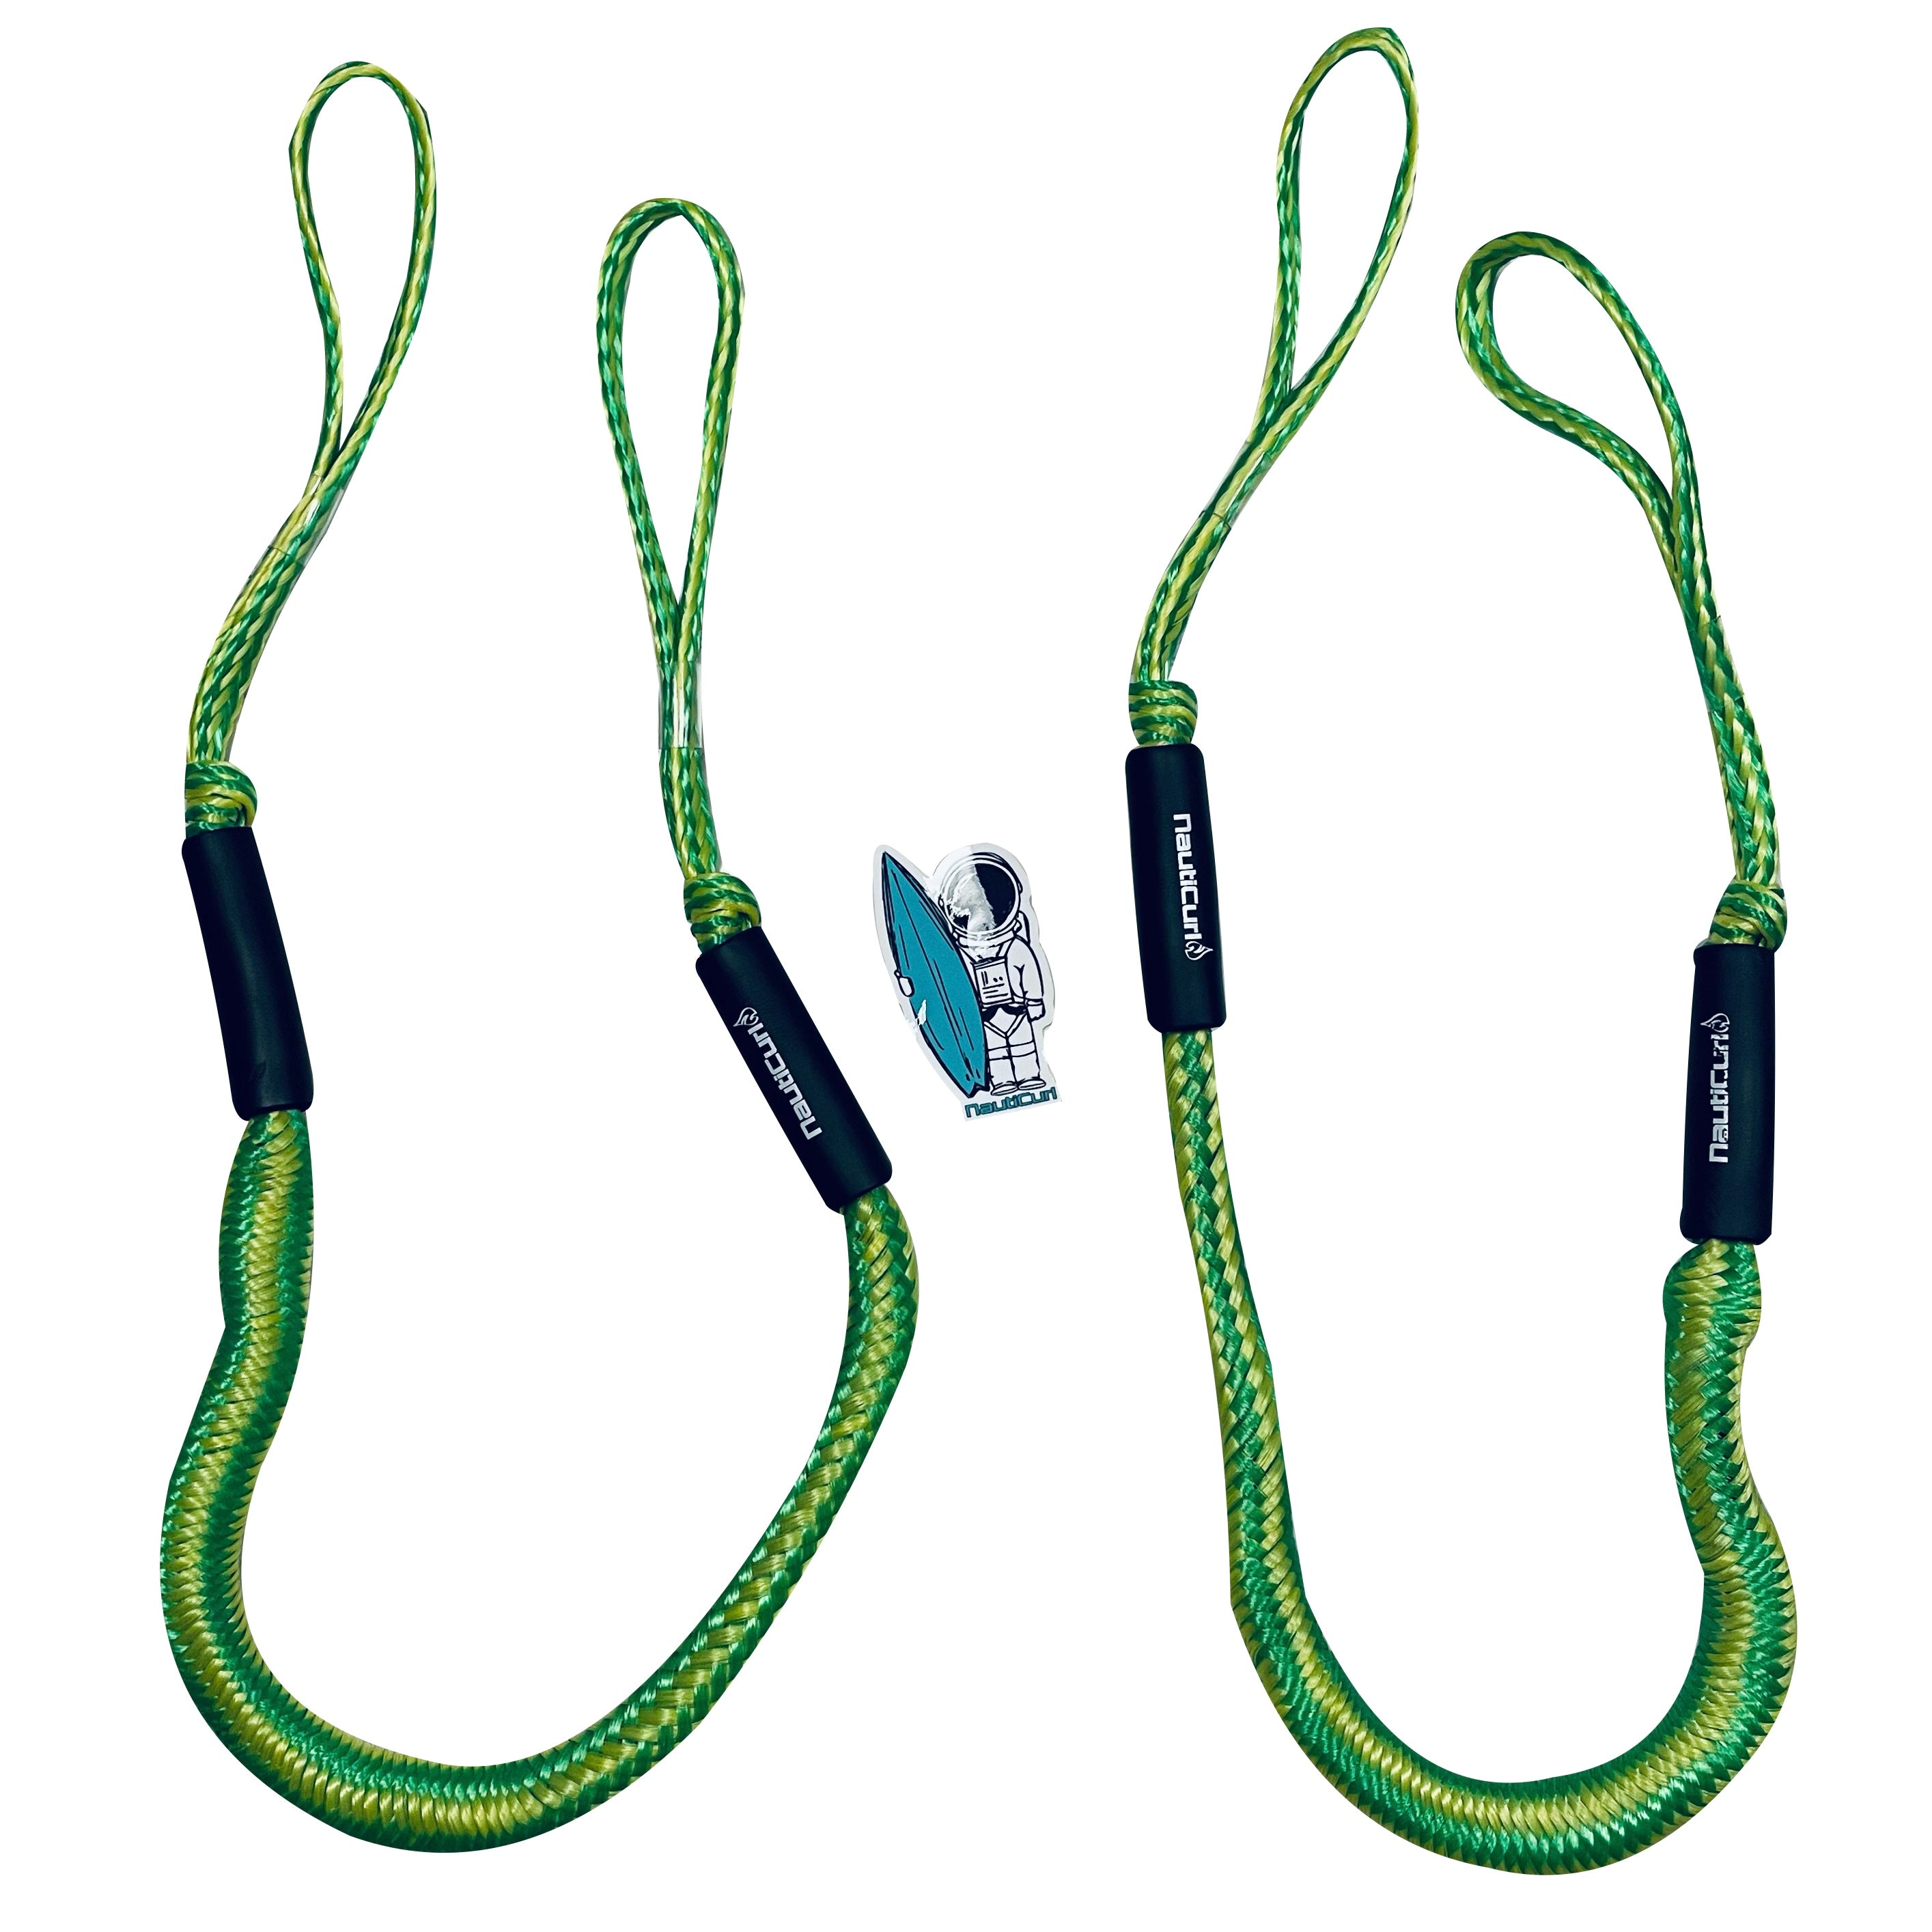 NautiCurl Bungee Boat Ropes - Shock Absorbing (2 Ropes)